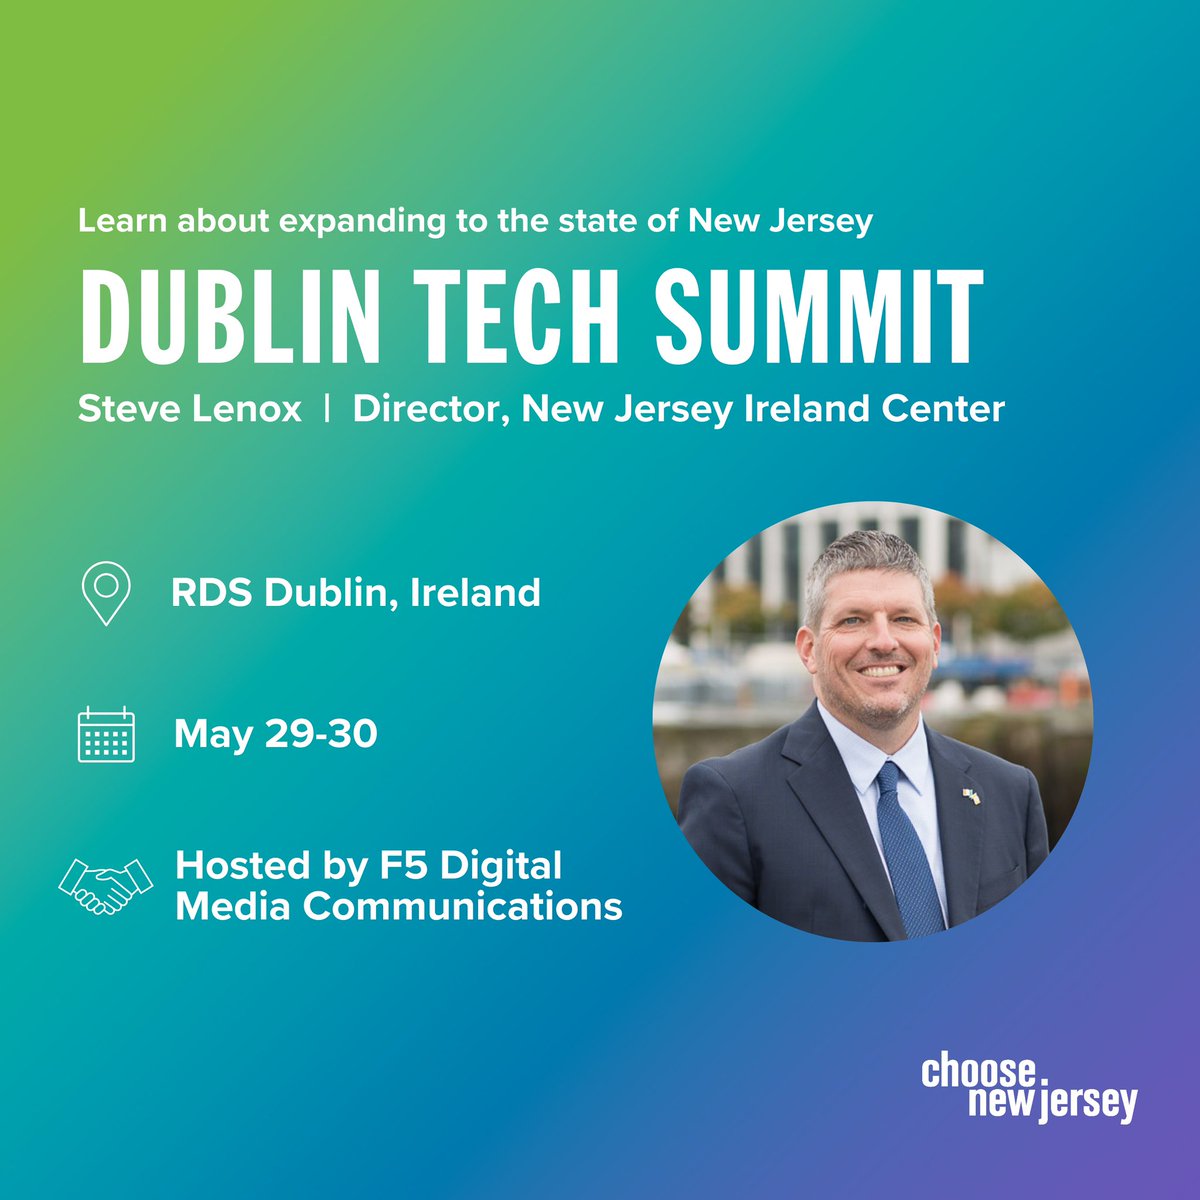 The train is leaving the station…. Heading out of Cork for #DubTechSummit. Looking forward to seeing you there! @ChooseNJ #ai #tech